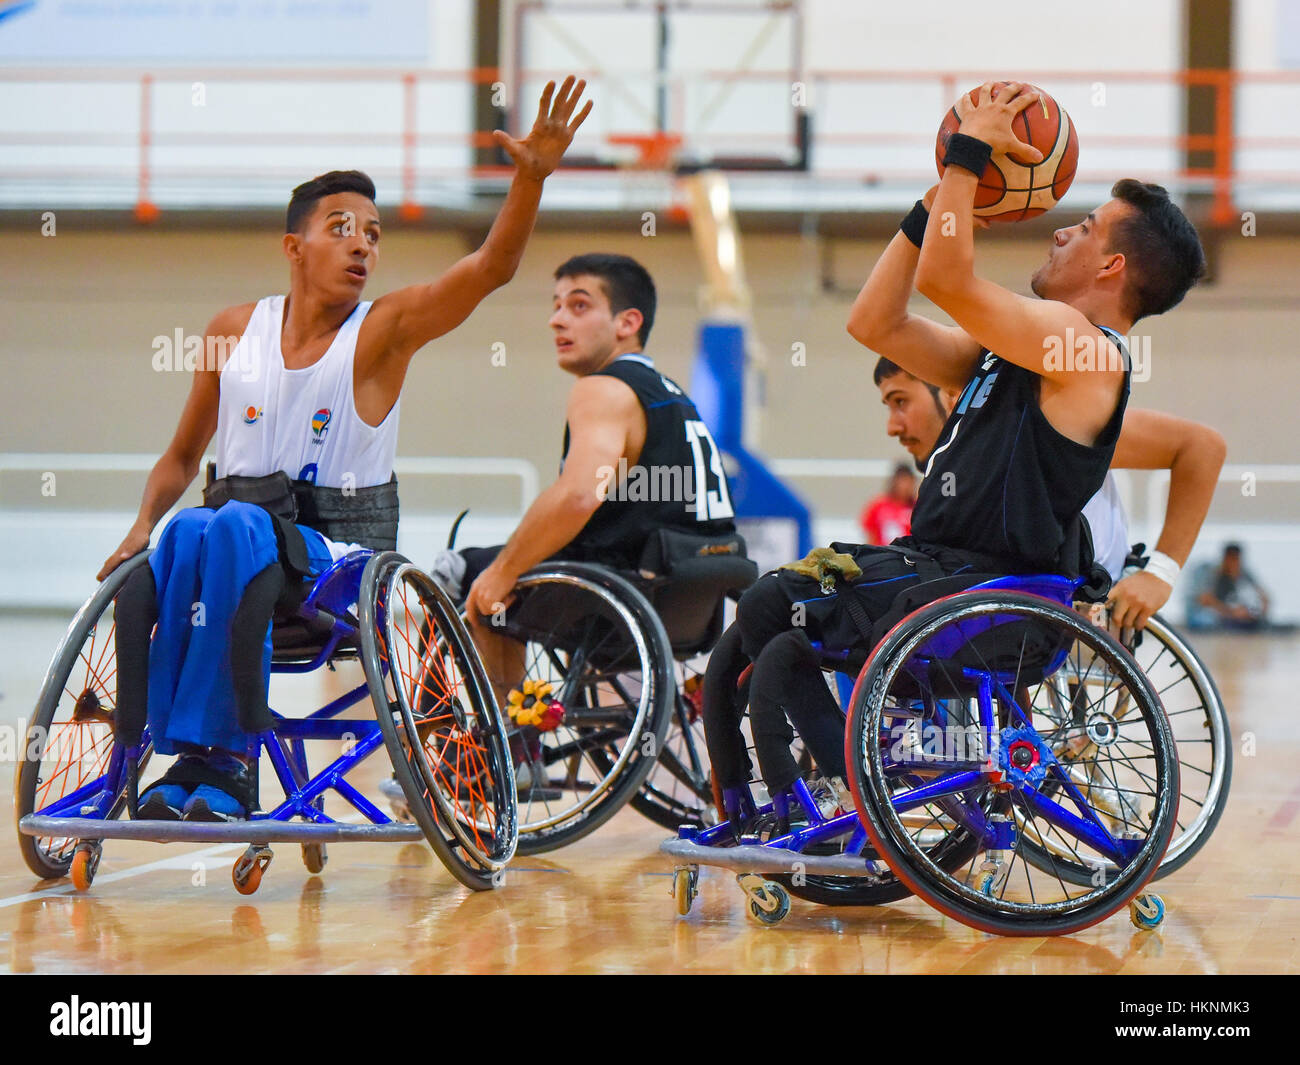 Buenos Aires, Argentina. 27 Jan, 2017. Brazil vs. Argentina wheelchair basketball game during the Americas Championship 2017. Stock Photo